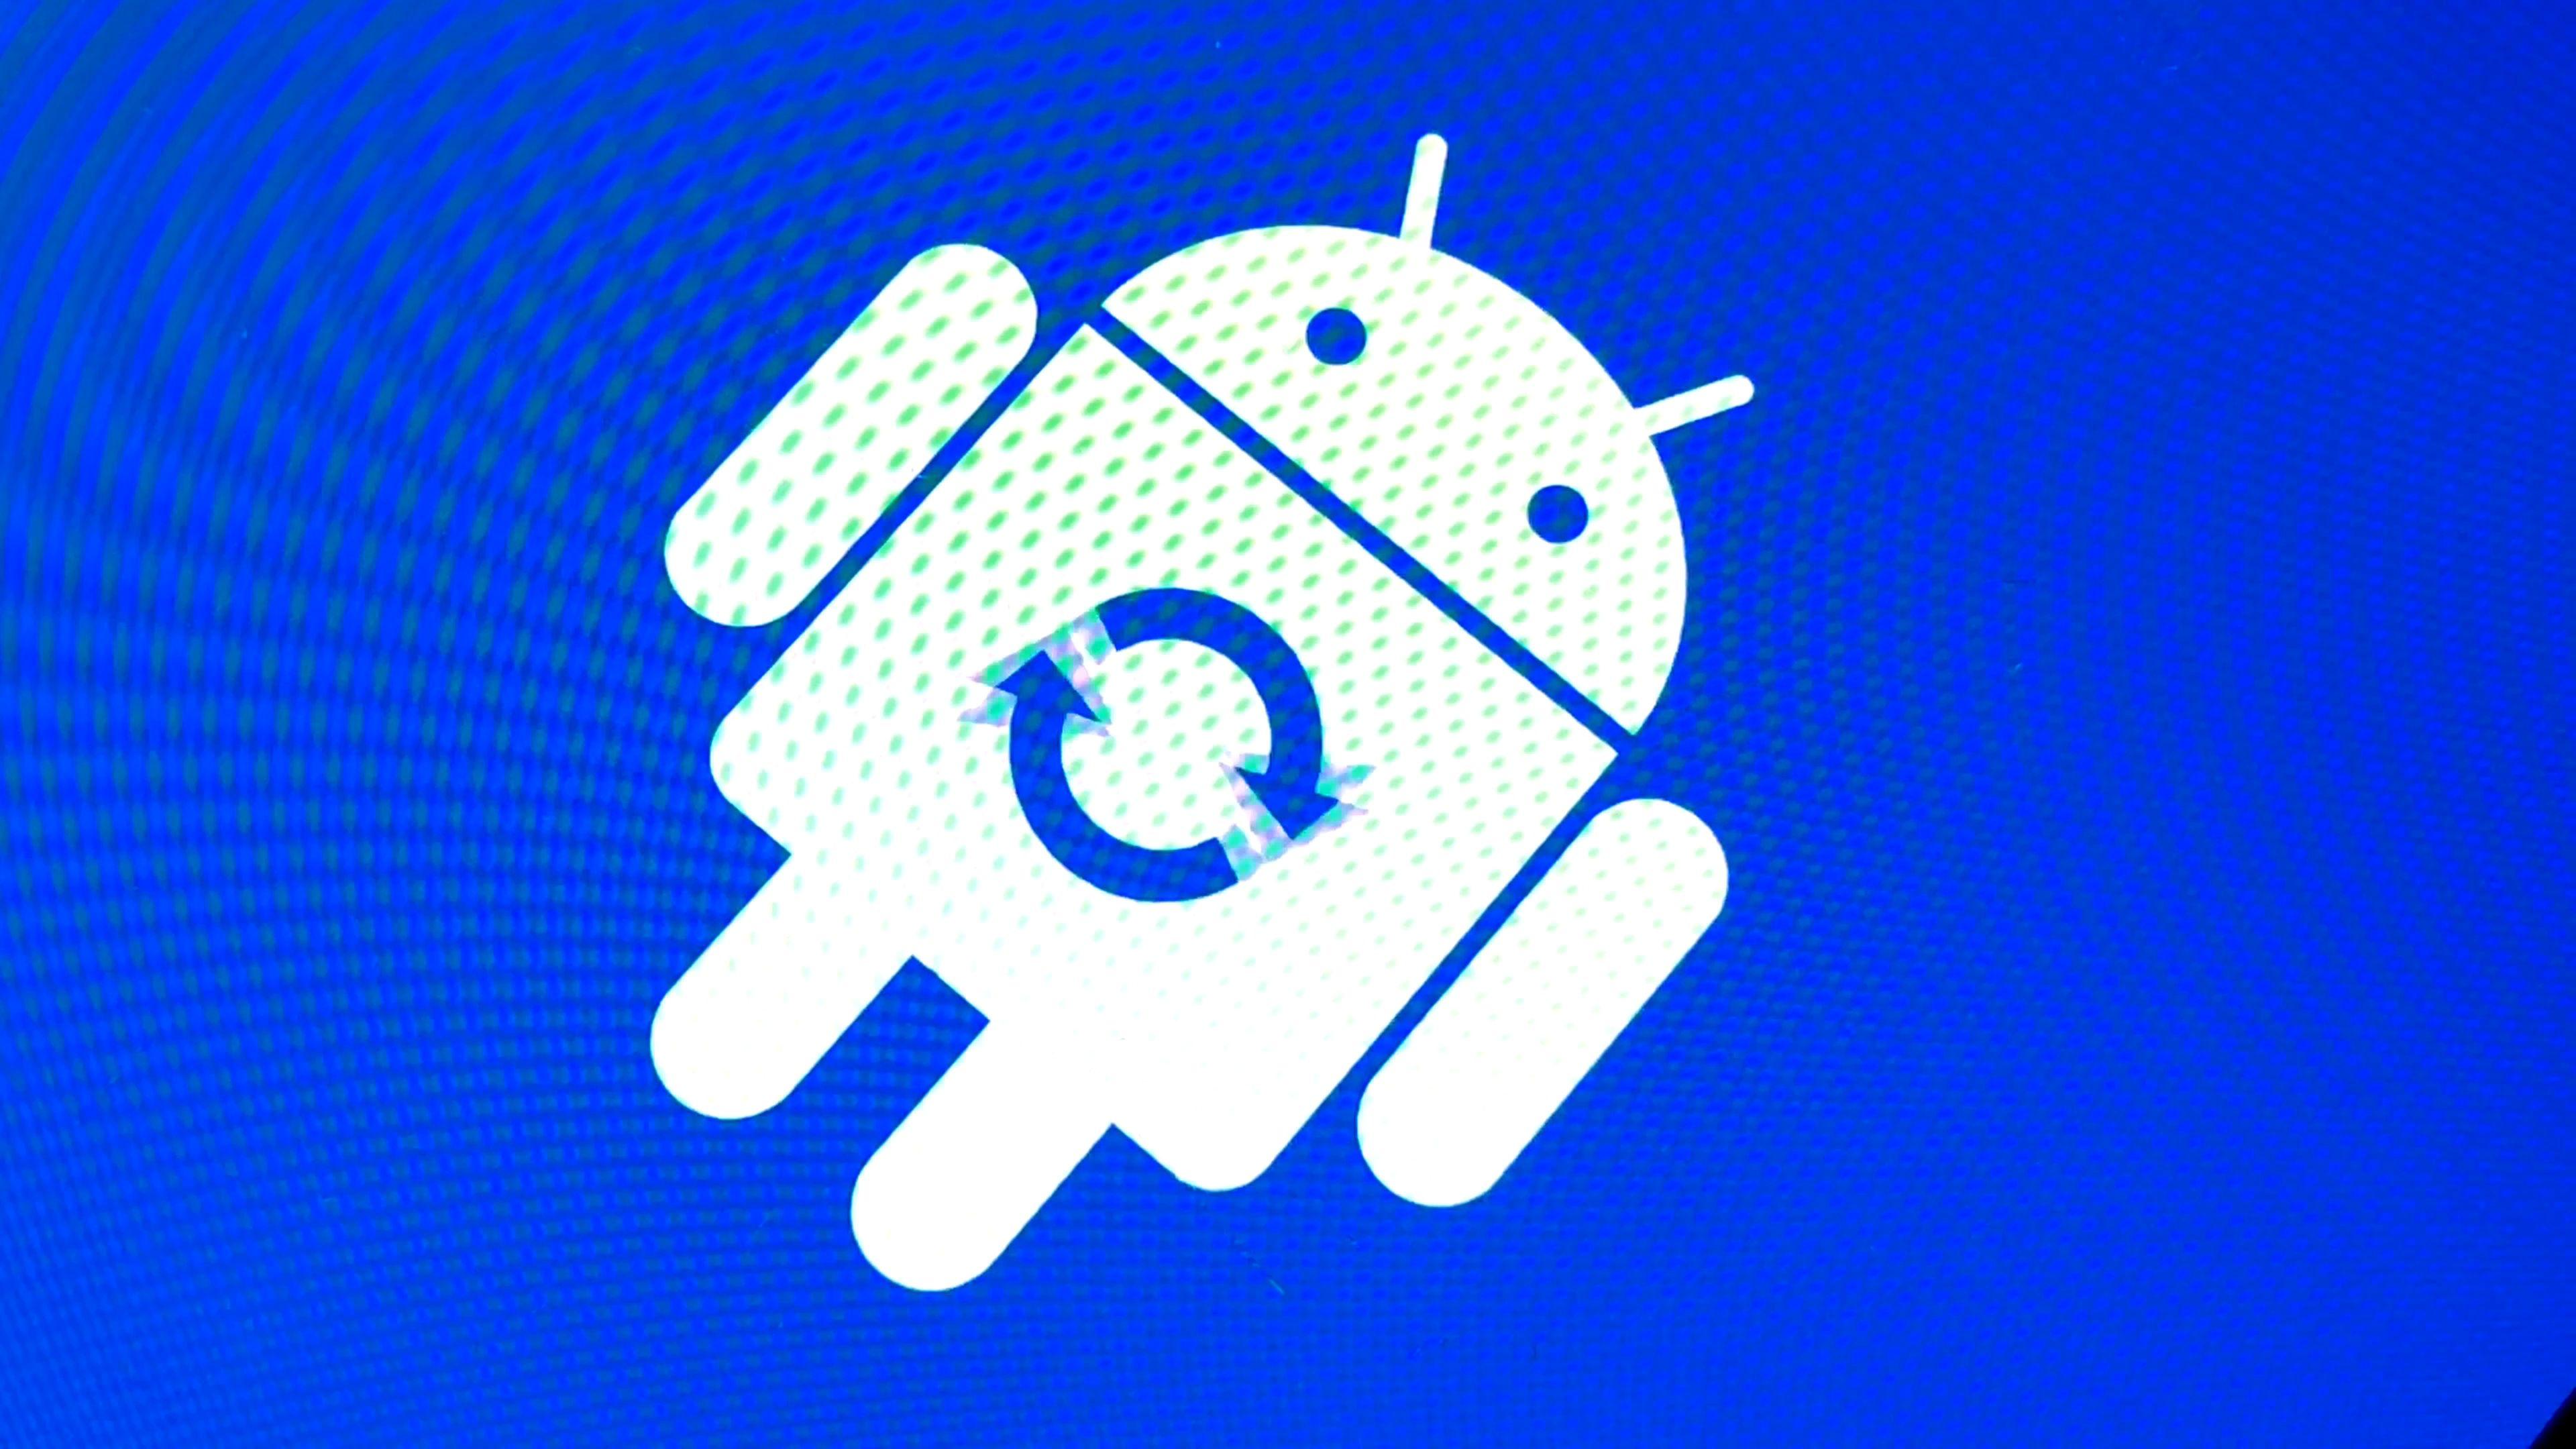 Android Robot Logo - Android robot logo icon on the smart phone screen during update